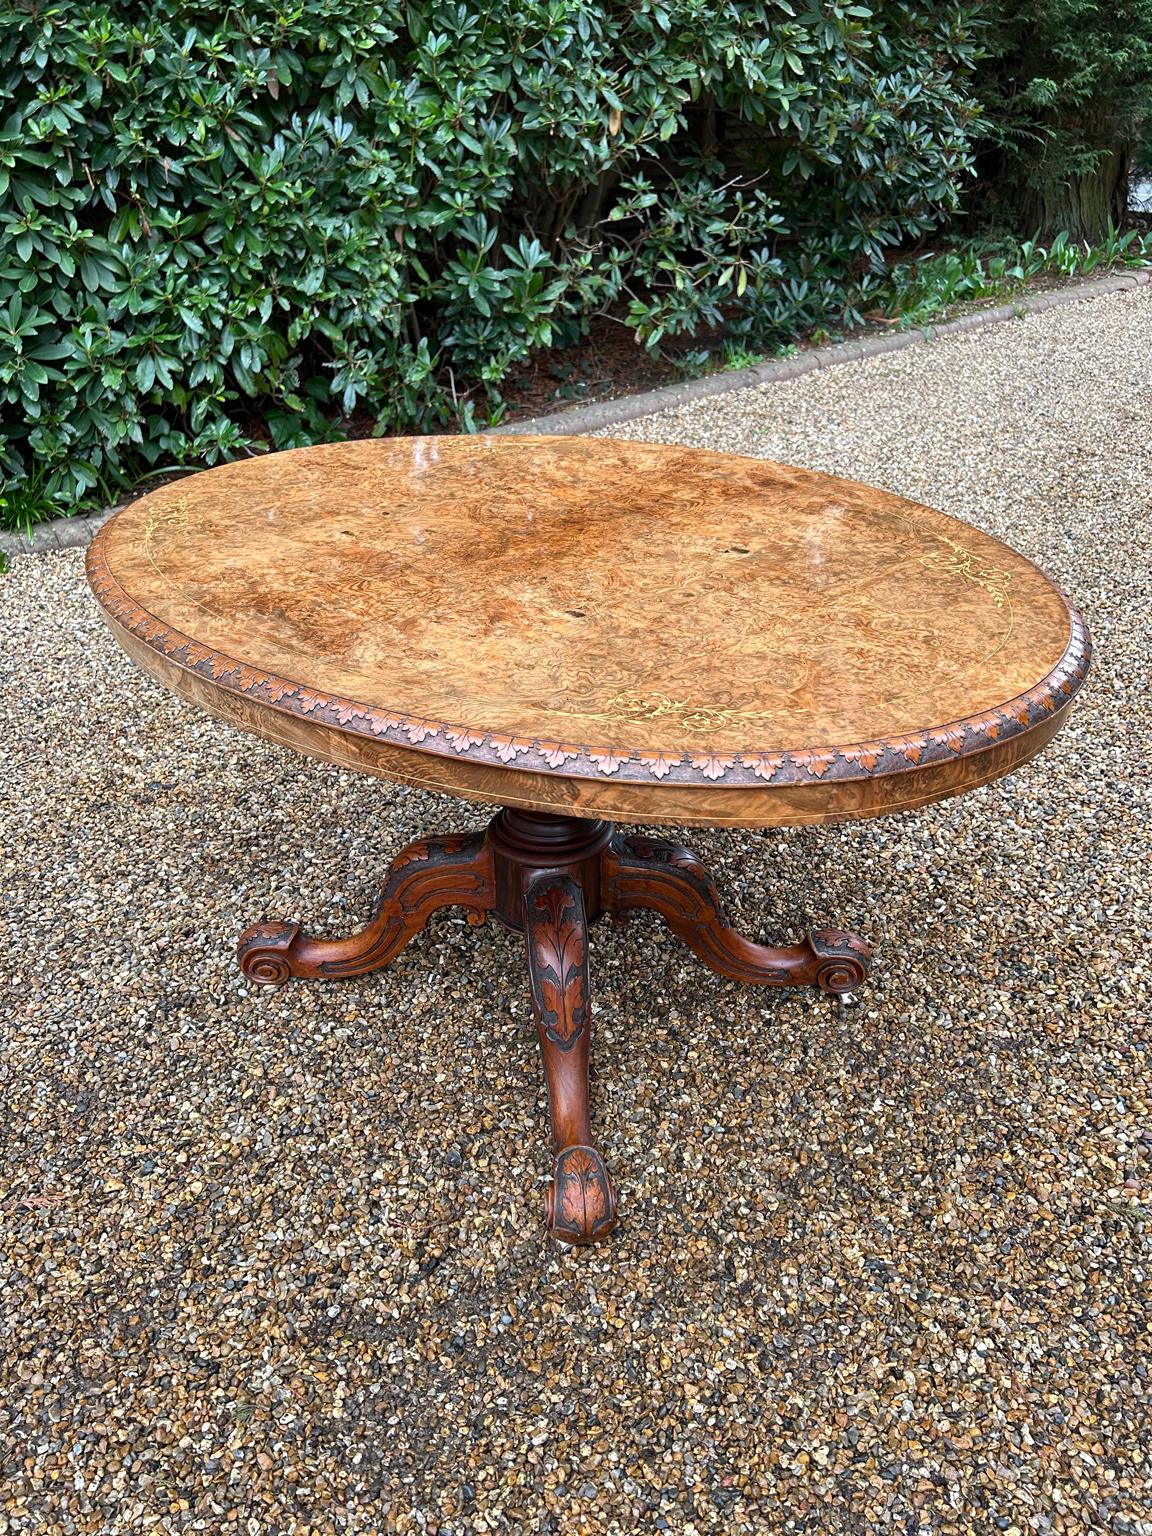 19th century Victorian burr walnut oval tilt-top dining table with floral carved edging and inlaid decoration, raised on a turned and carved baluster column and four carved cabriole legs.

circa: 1850

Dimensions:
Height: 28.5 inches – 72